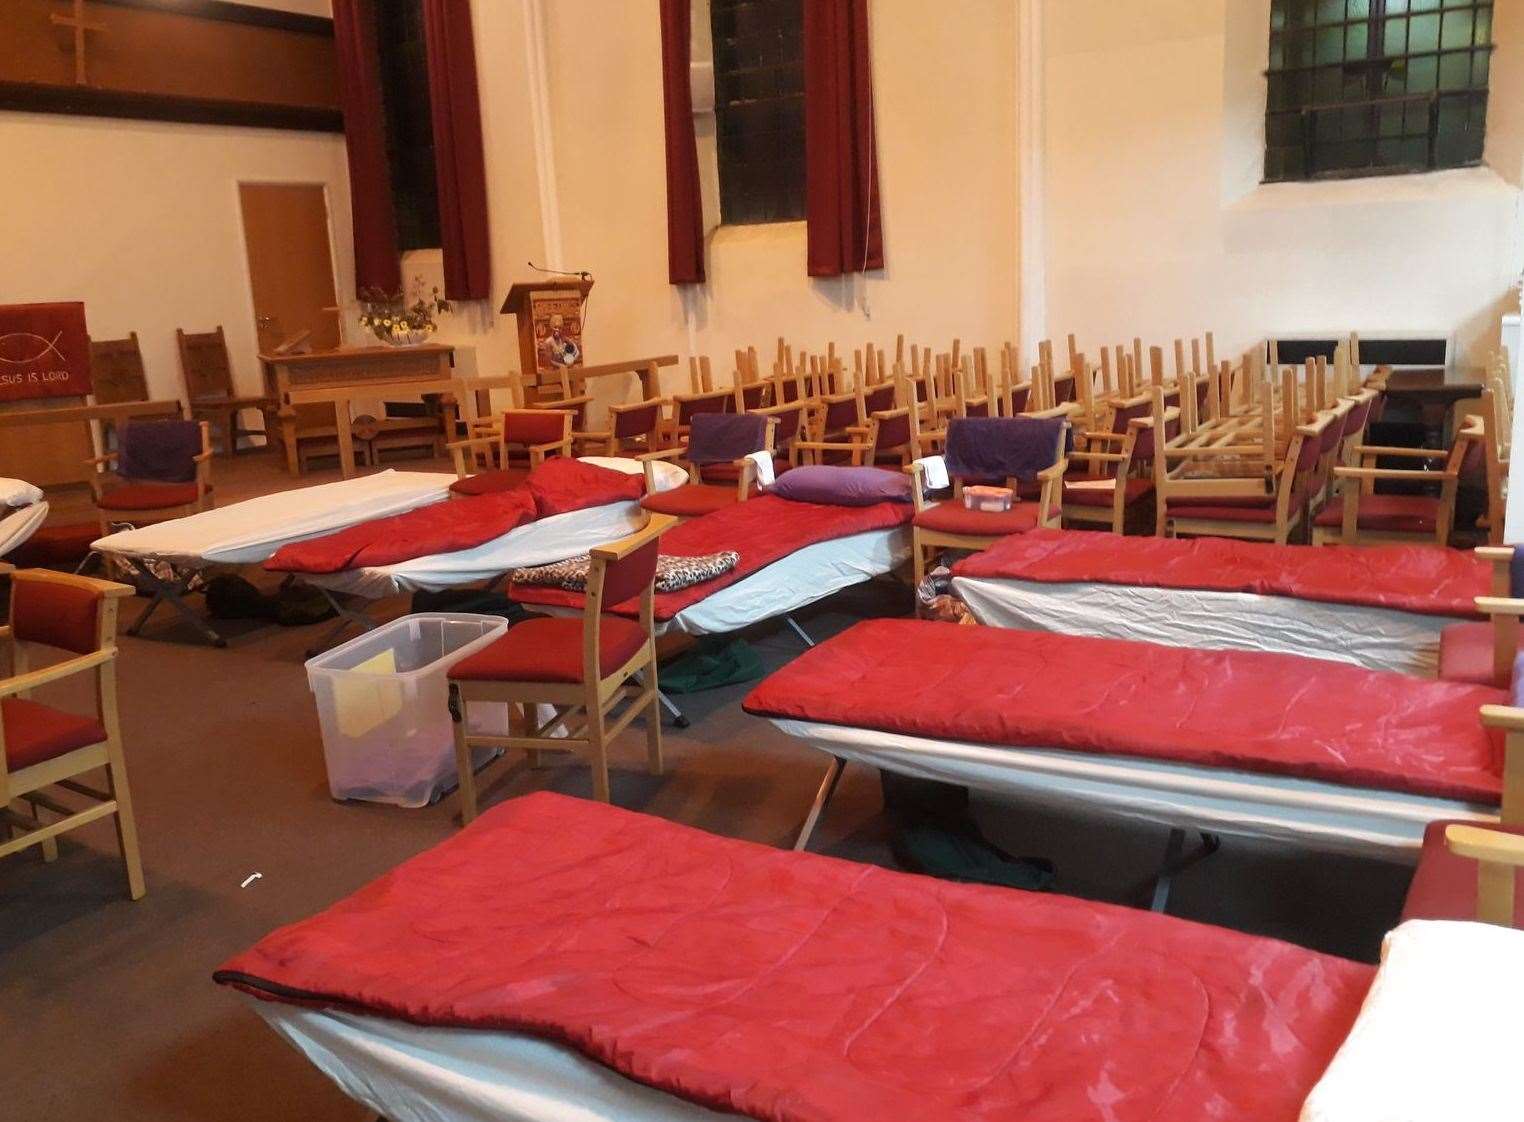 The Dartford Churches Winter Shelter will remain closed for another year.